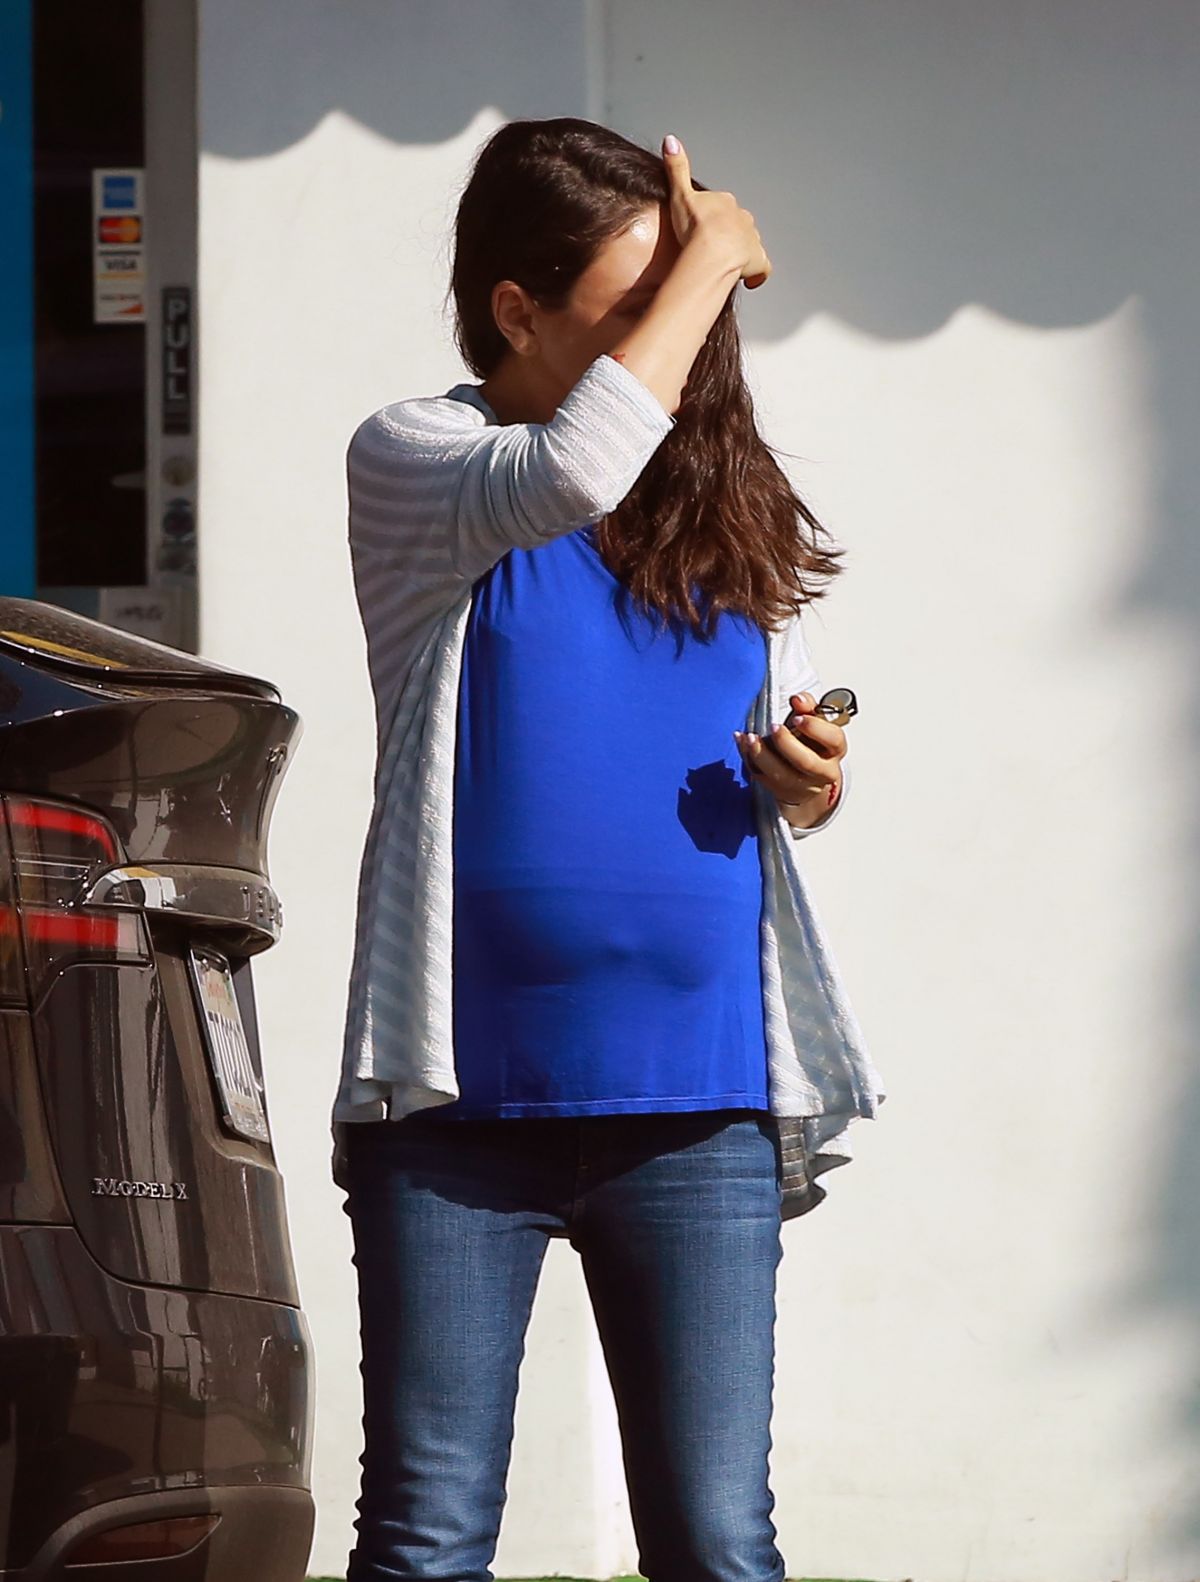 Pregnant Mila Kunis Out And About In Studio City 10252016 Hawtcelebs